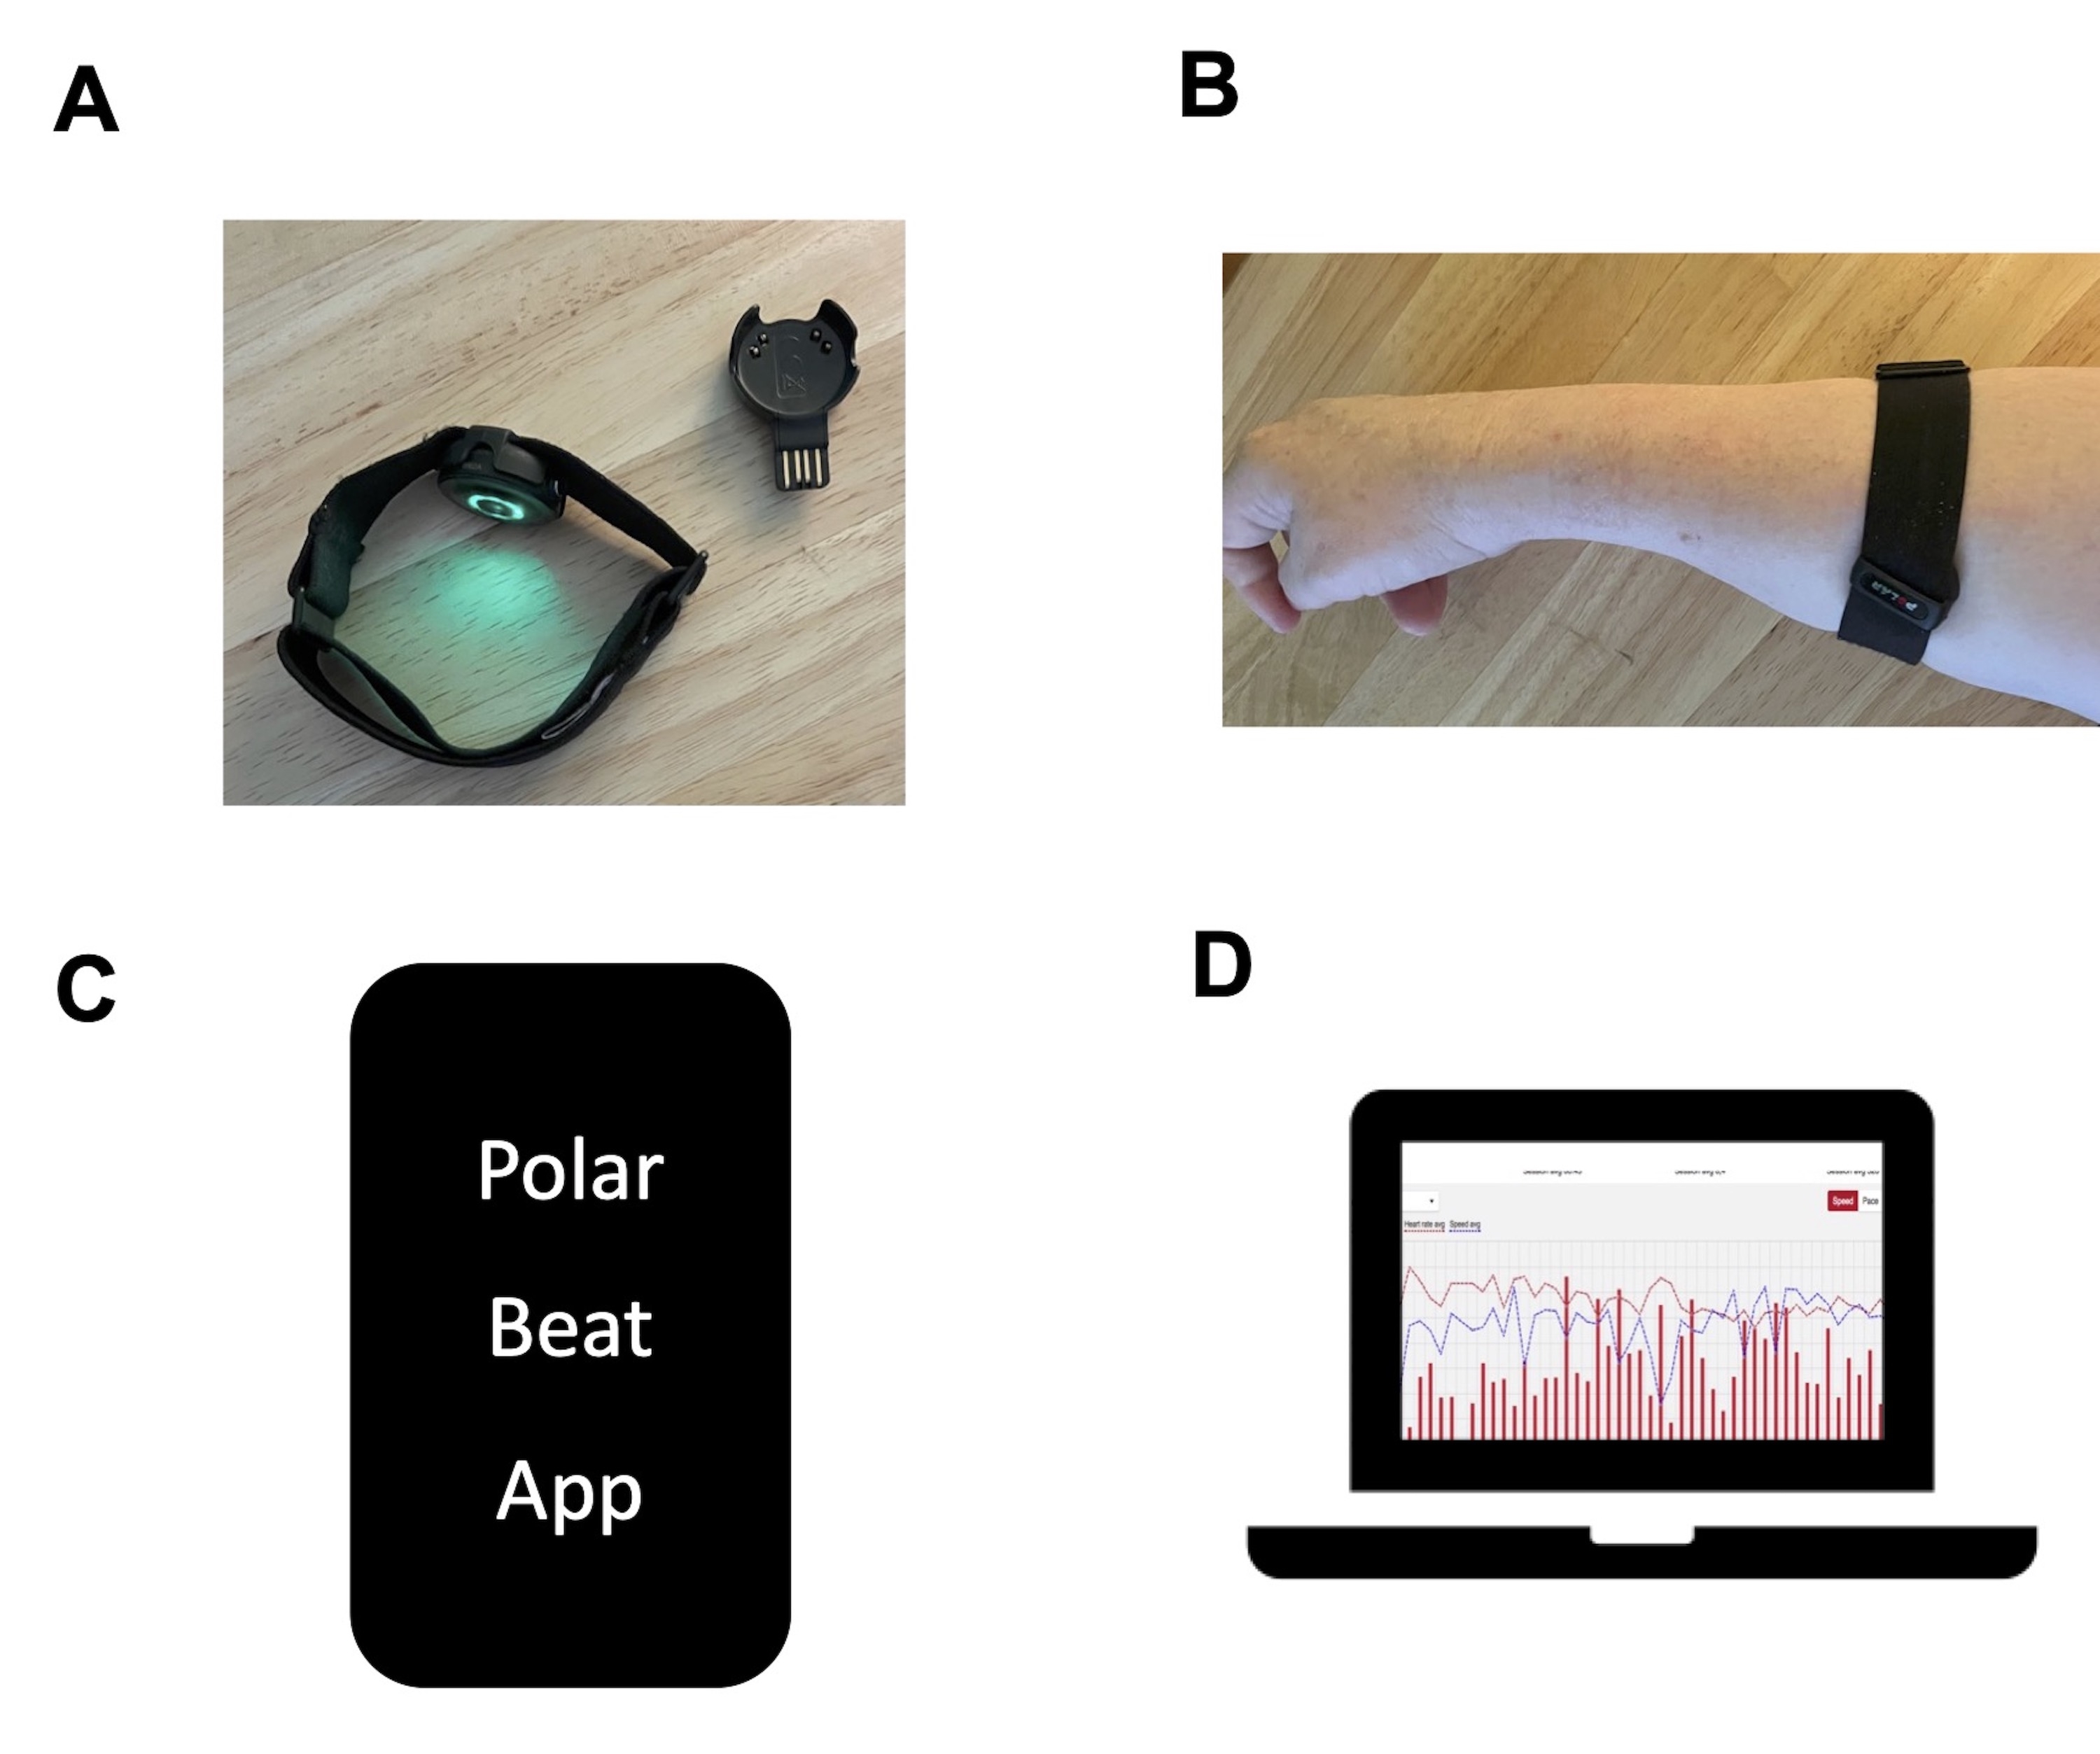 Figure 2. Polar OH1 Heart Rate monitor. 